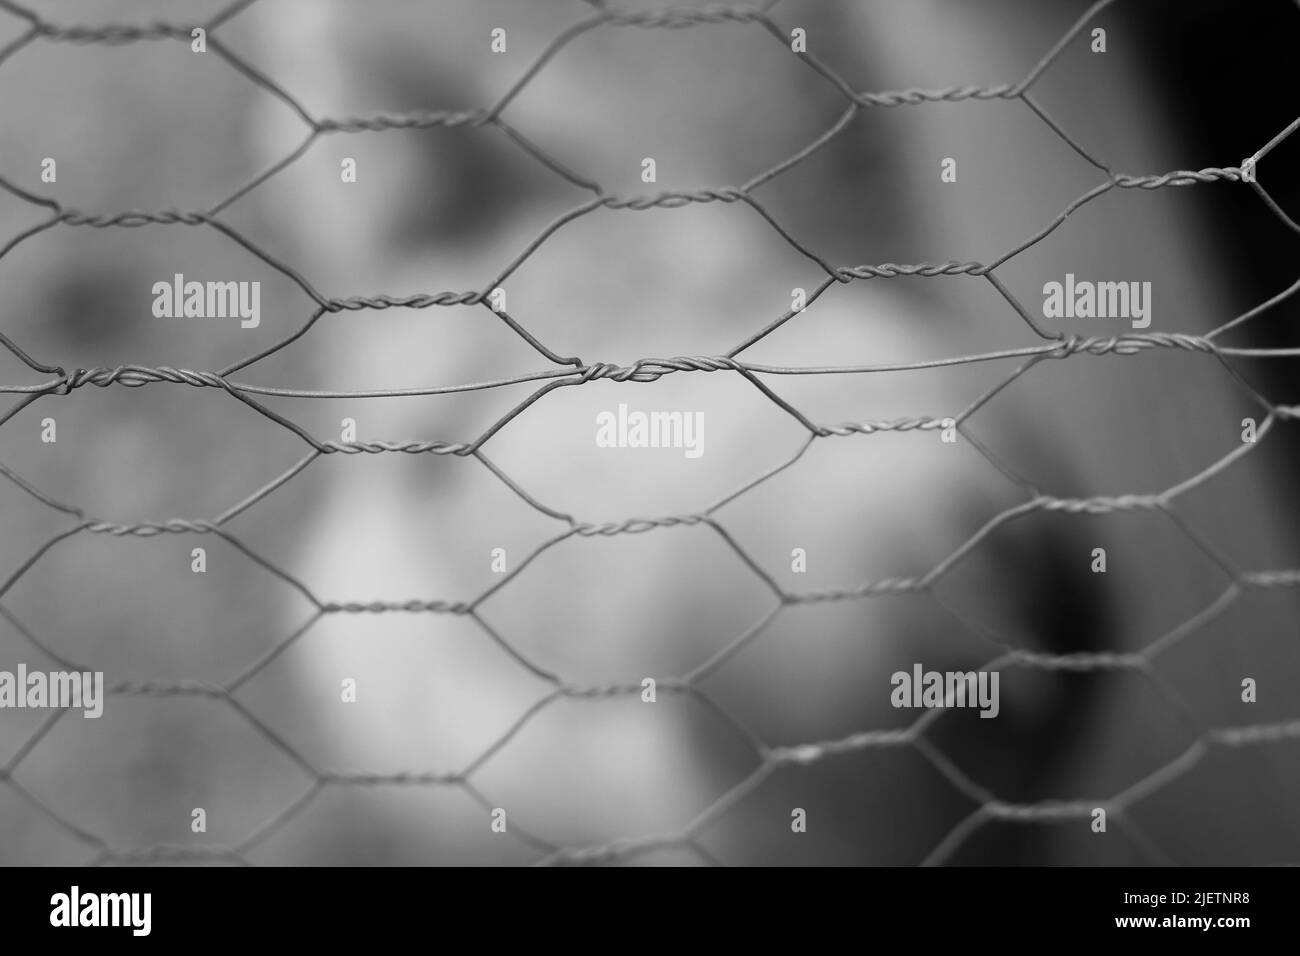 Traditional wire fence surrounding a chicken coop in black and white. Stock Photo